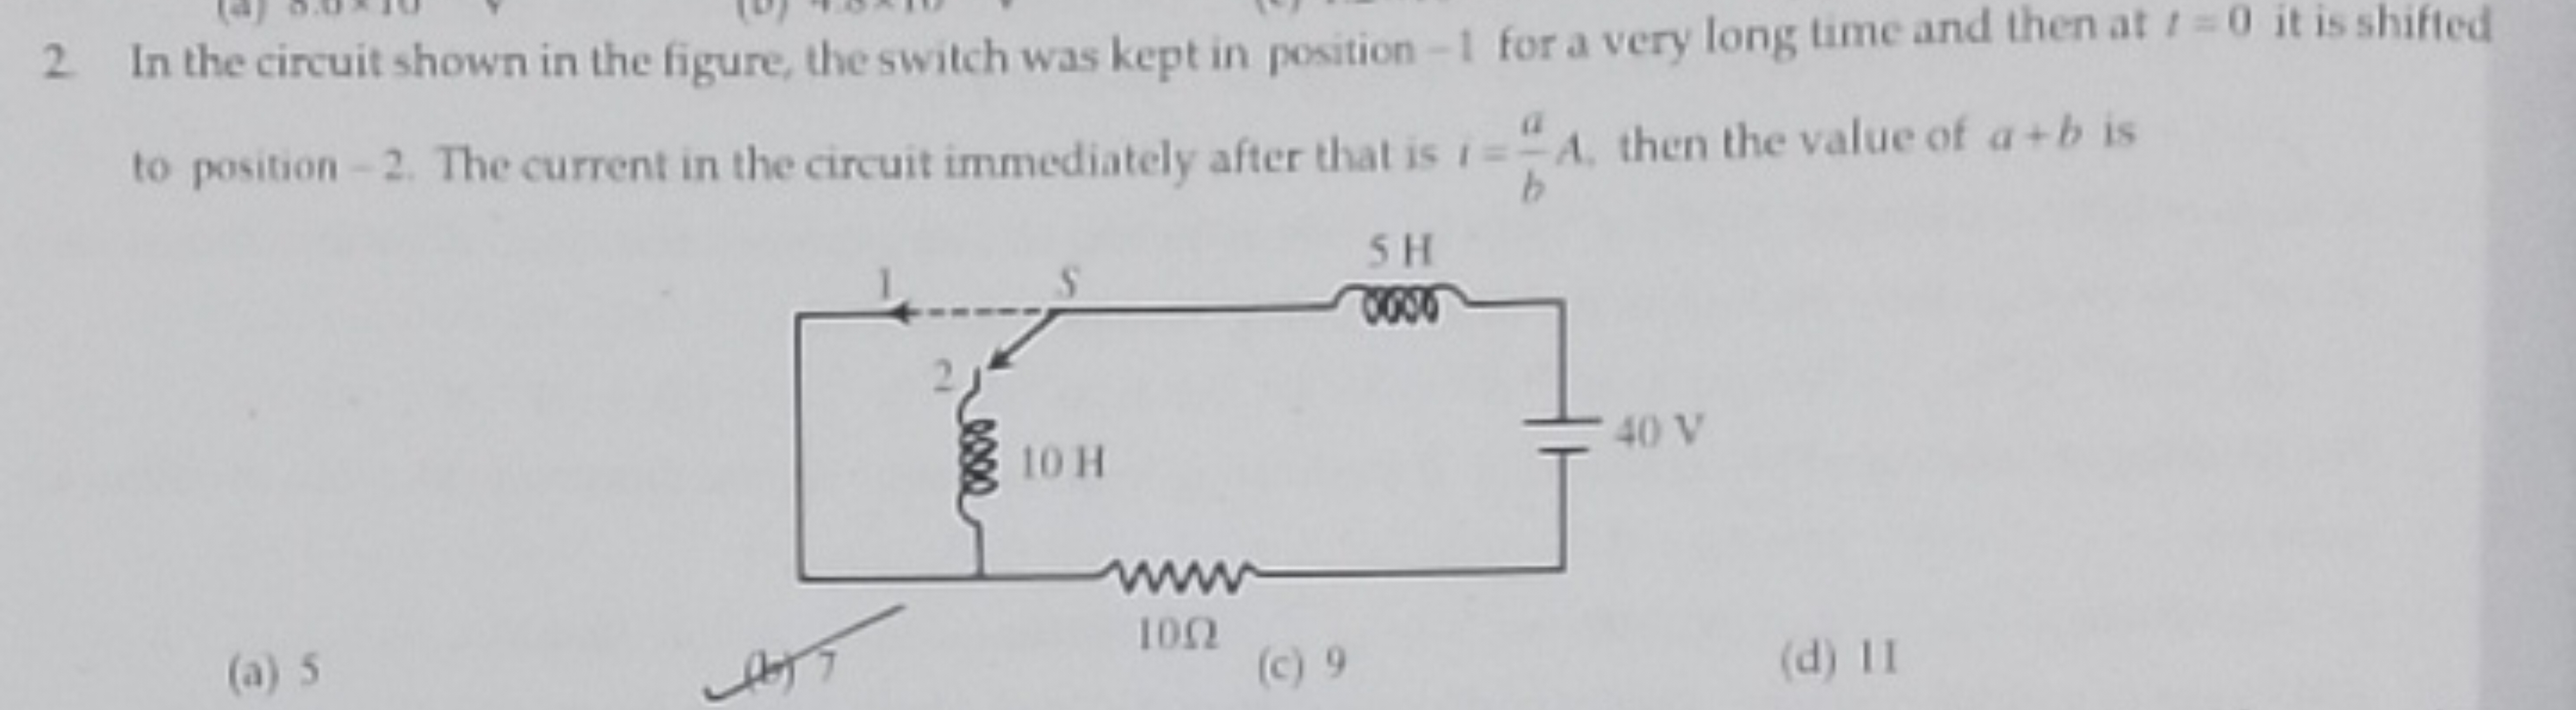 In the circuit shown in the figure, the switch was kept in position - 